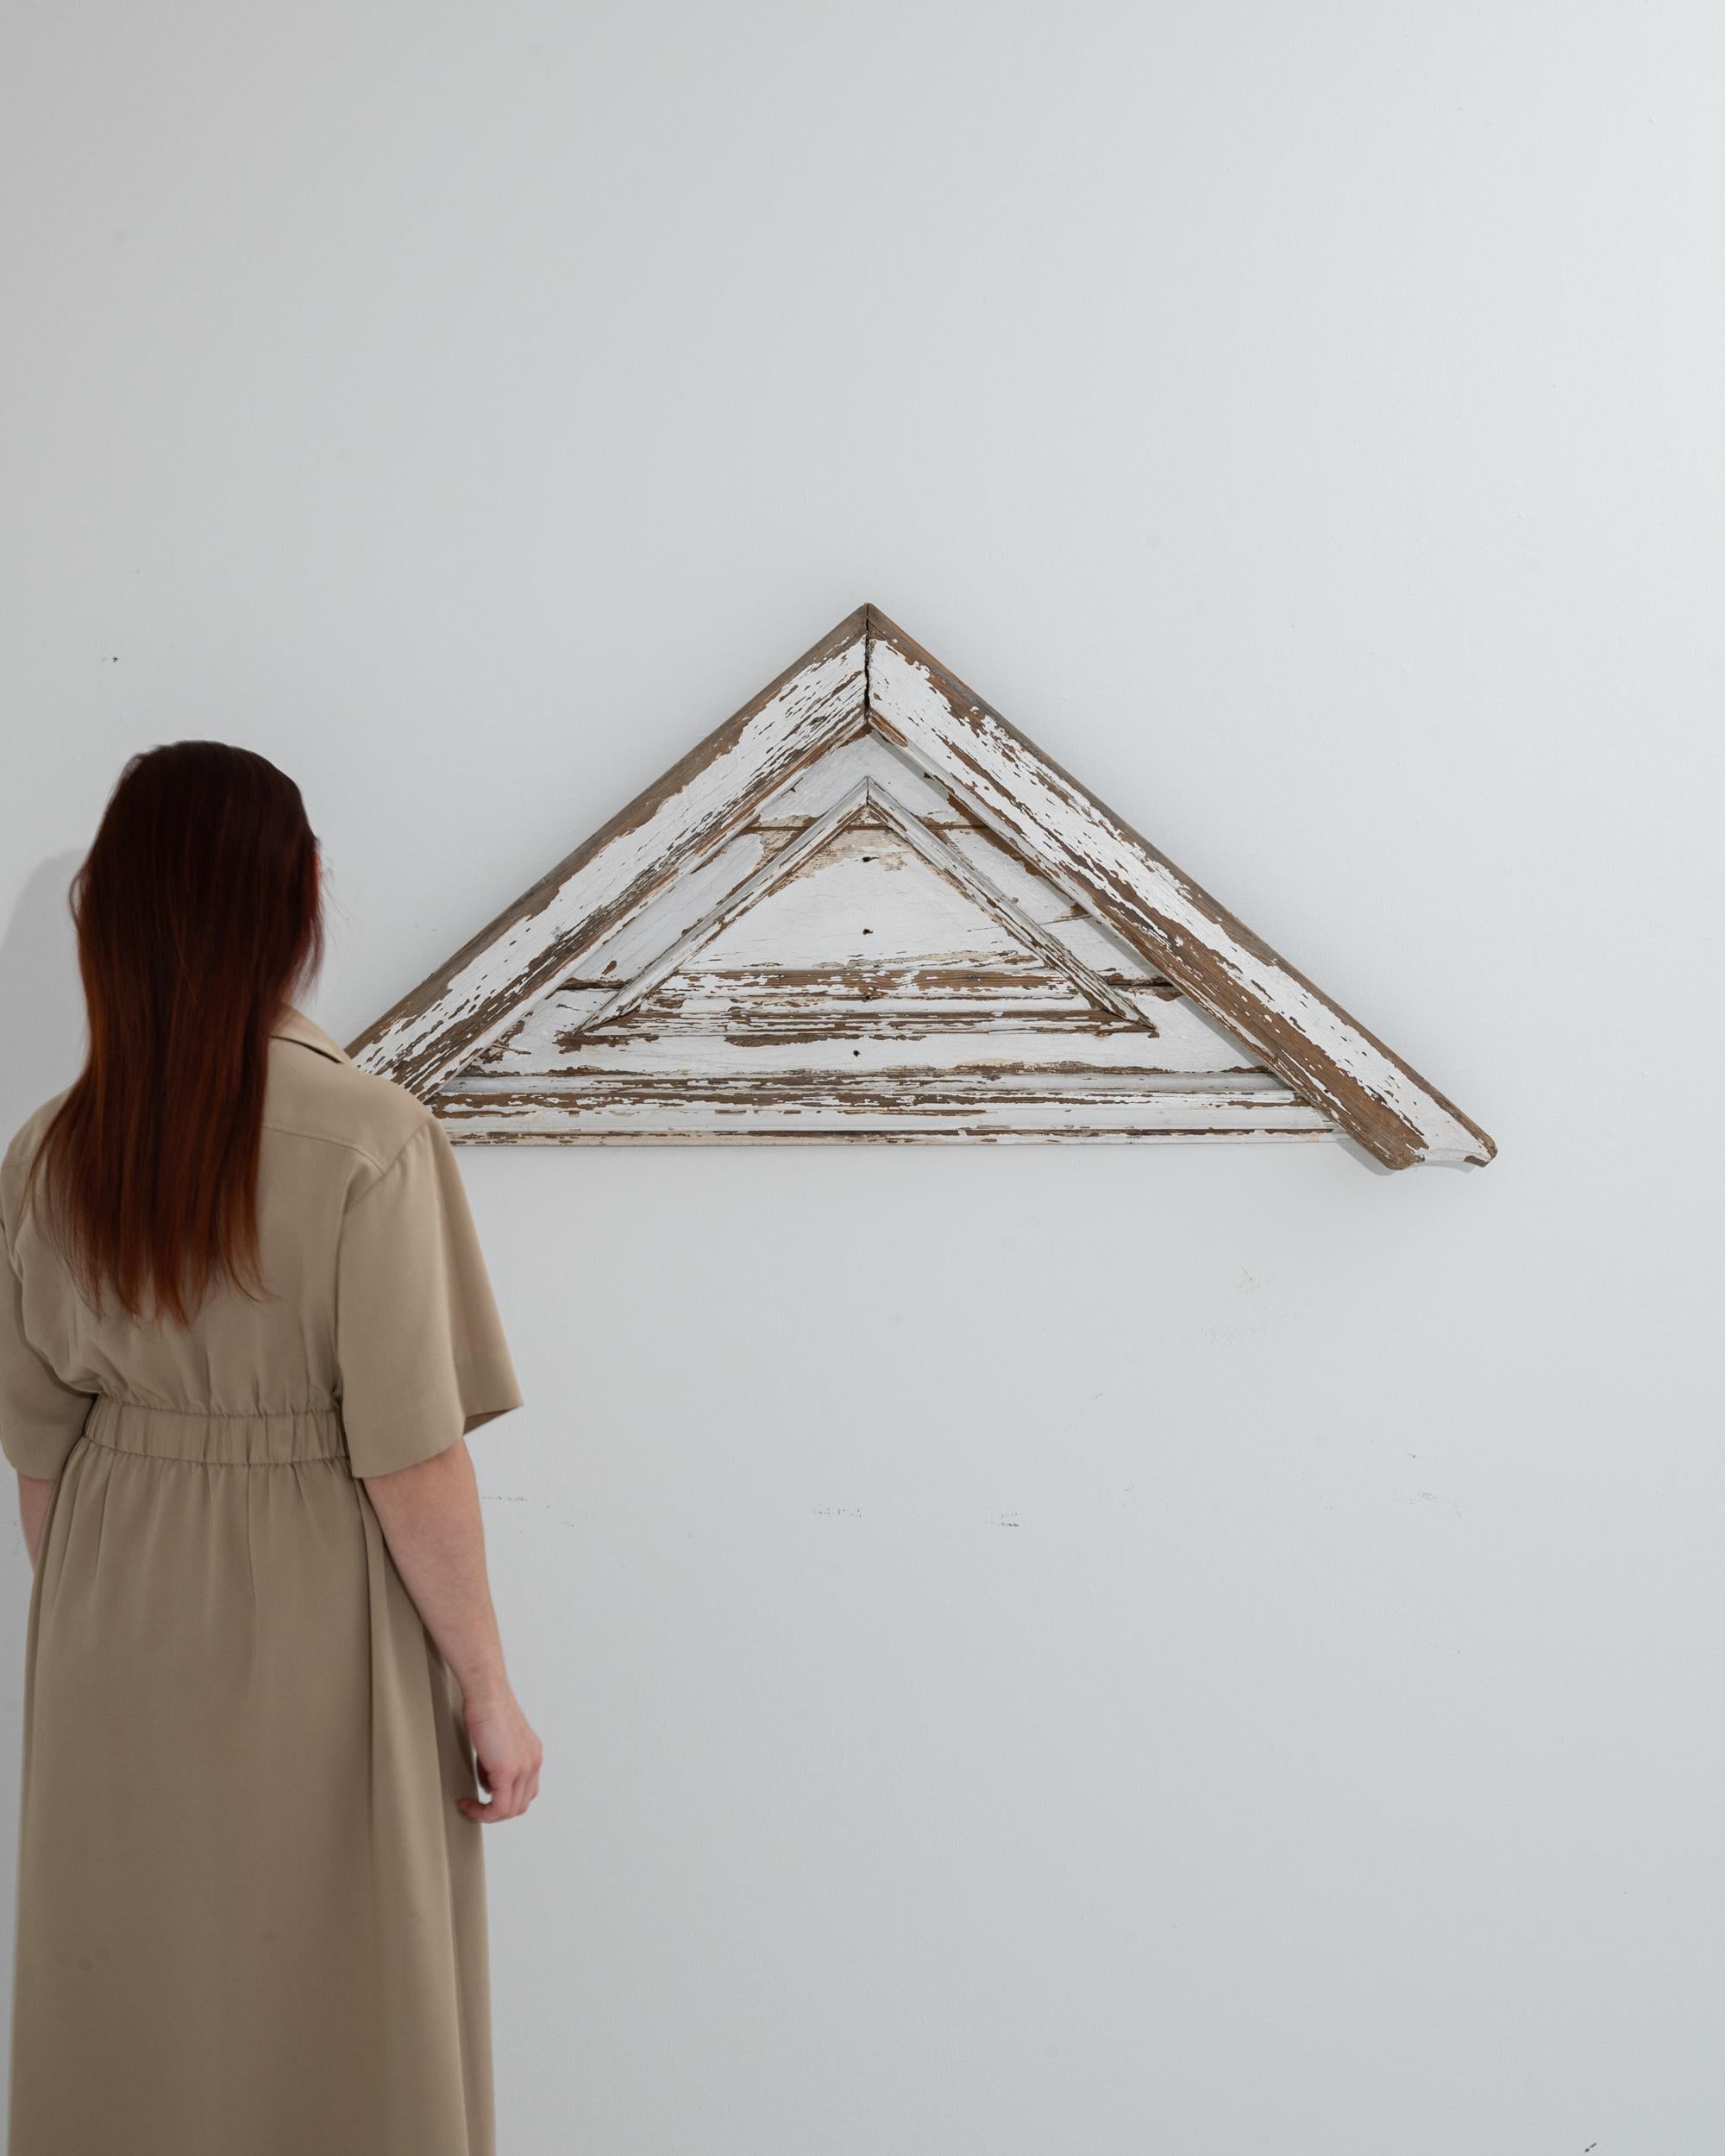 This 20th Century French Wood Patinated Wall Decoration is a rustic gem that brings a touch of antique charm to any contemporary space. Its triangular silhouette, a symbol of stability and creativity, adds a geometric edge to walls that crave